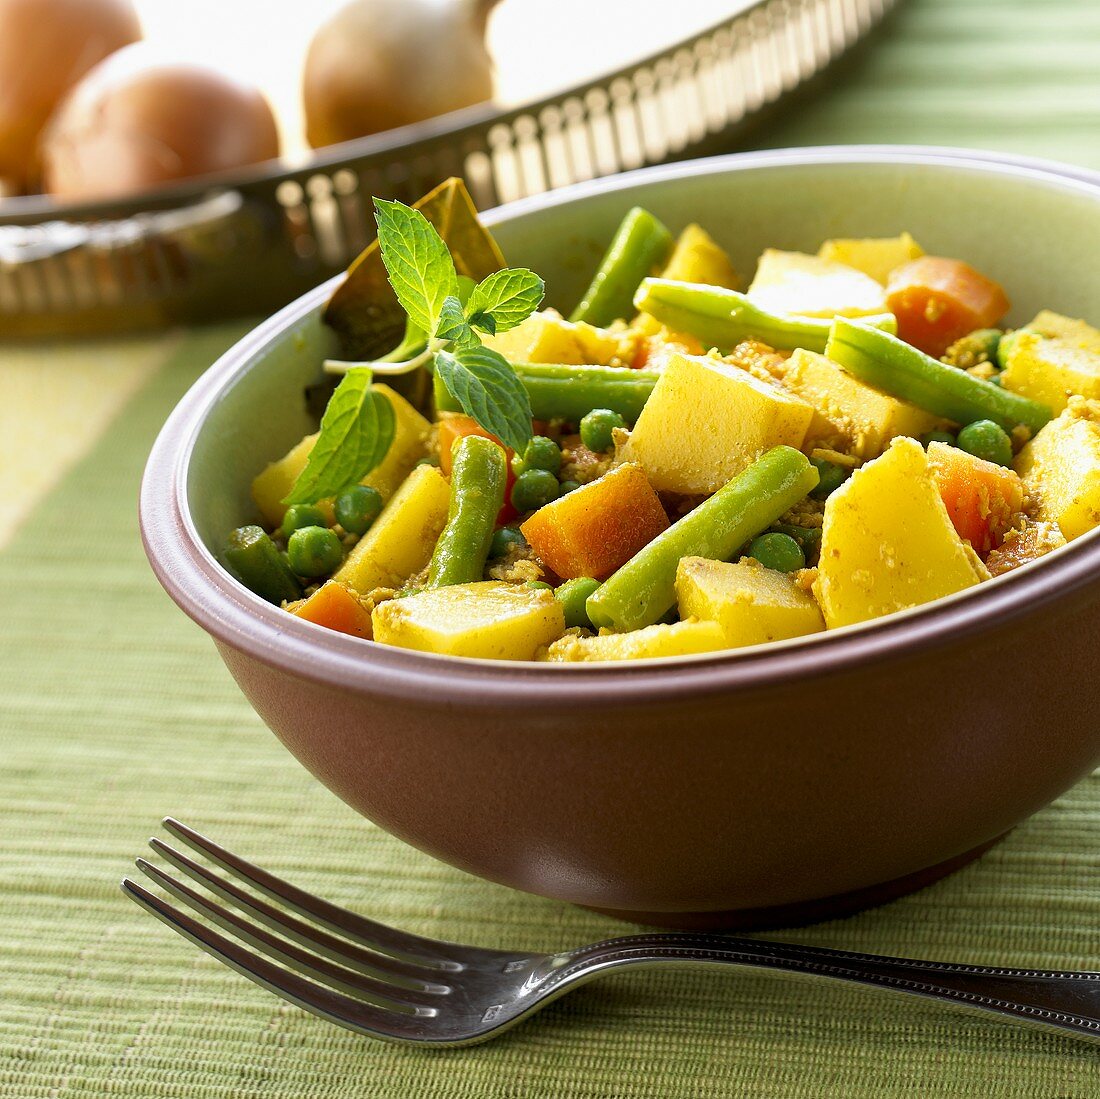 Vegetable curry (potatoes, beans, peas and carrots; India)